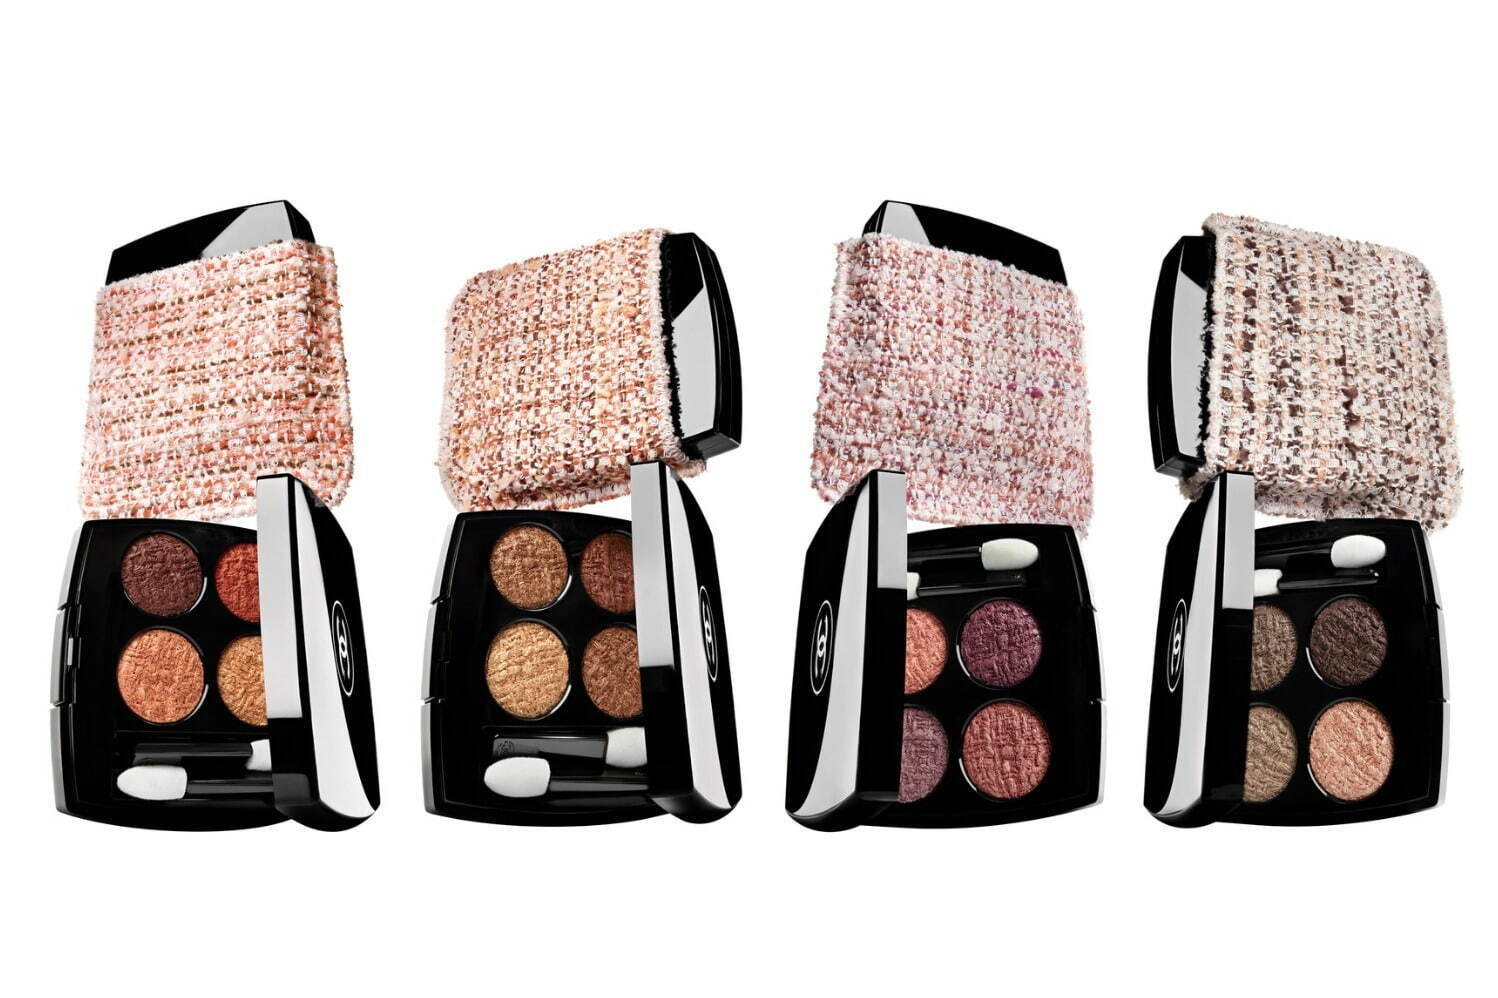 Chanel Beauty To Launch Collectible Tweed Eyeshadow Palettes